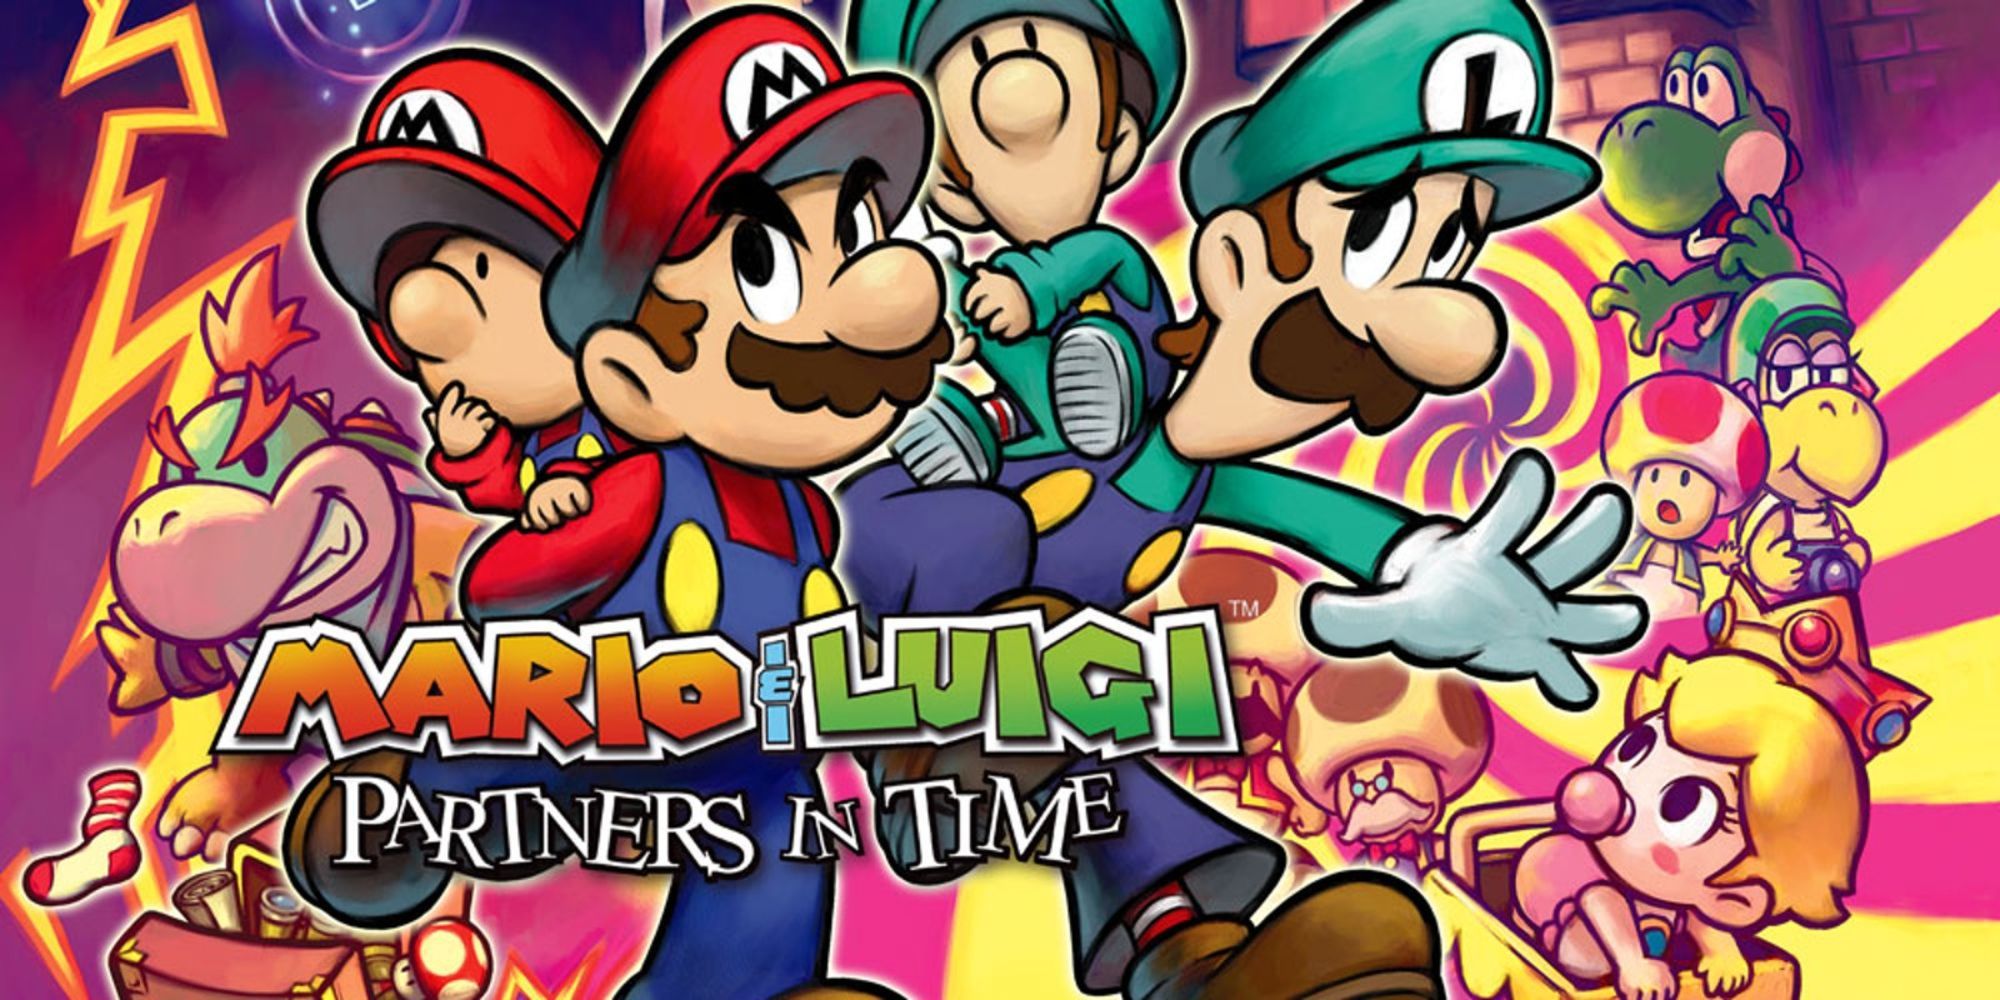 Mario frowning next to a scared Luigi in front of baby version in promotional art for Partners in Time